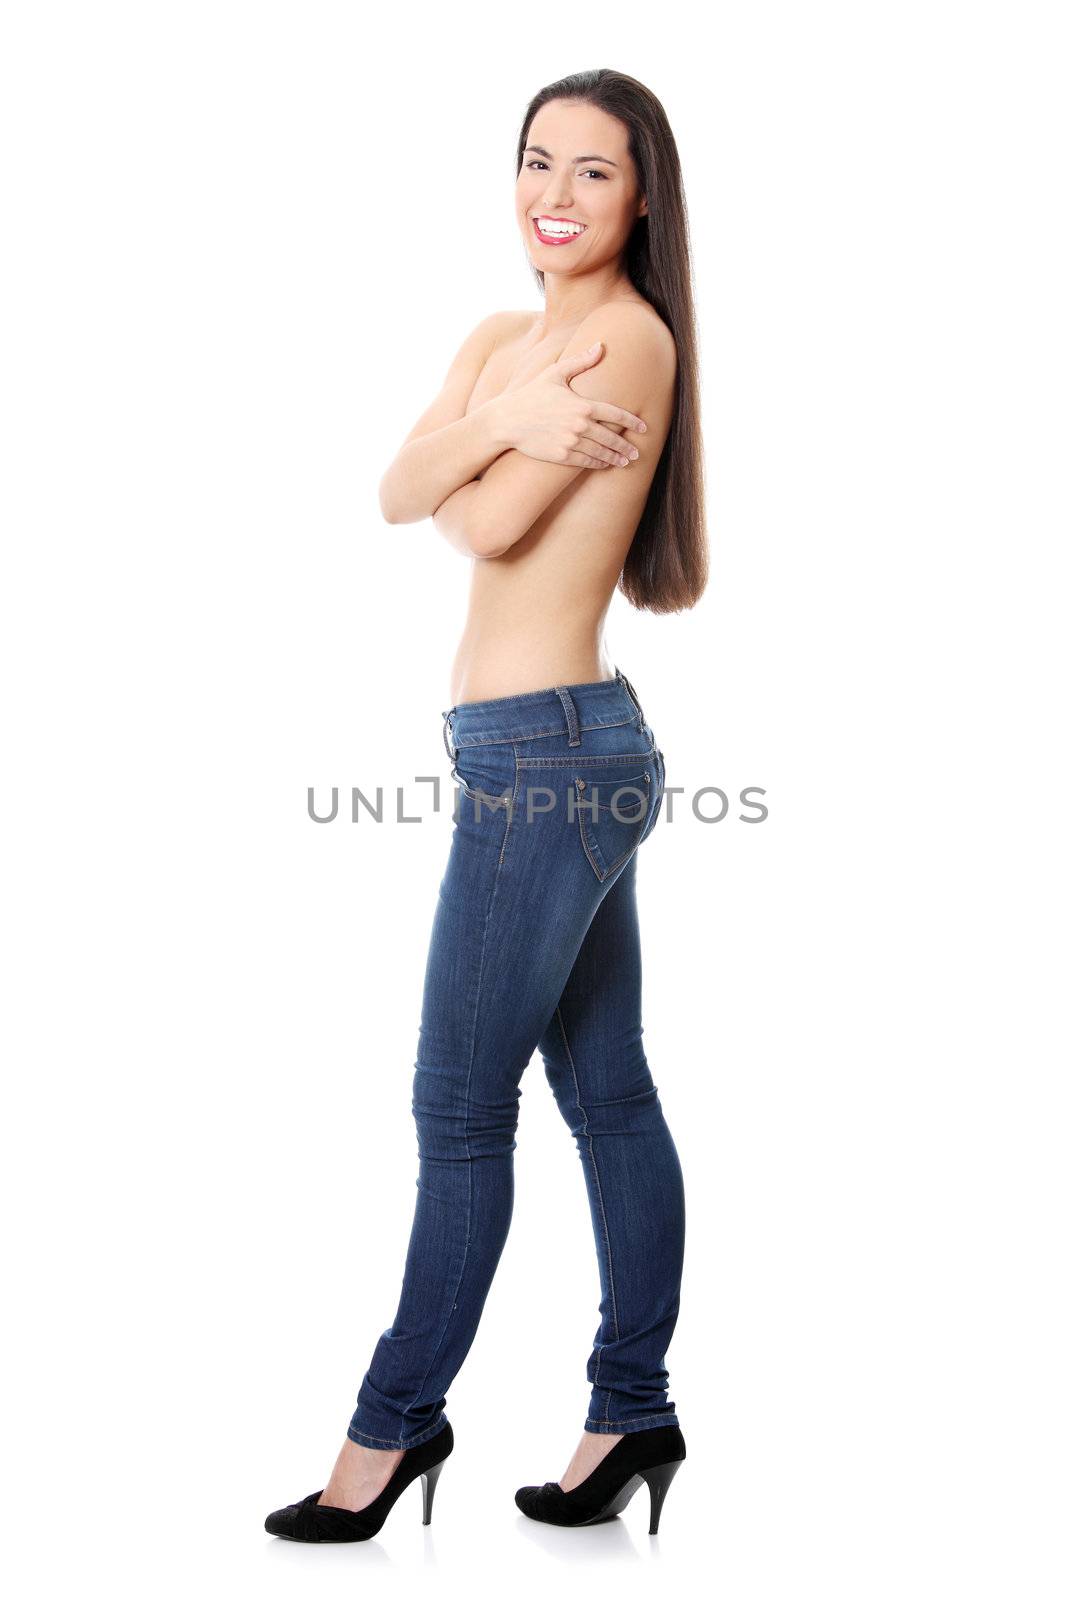 Young topless woman with long hairs, dressed in jeans. Isolated on white